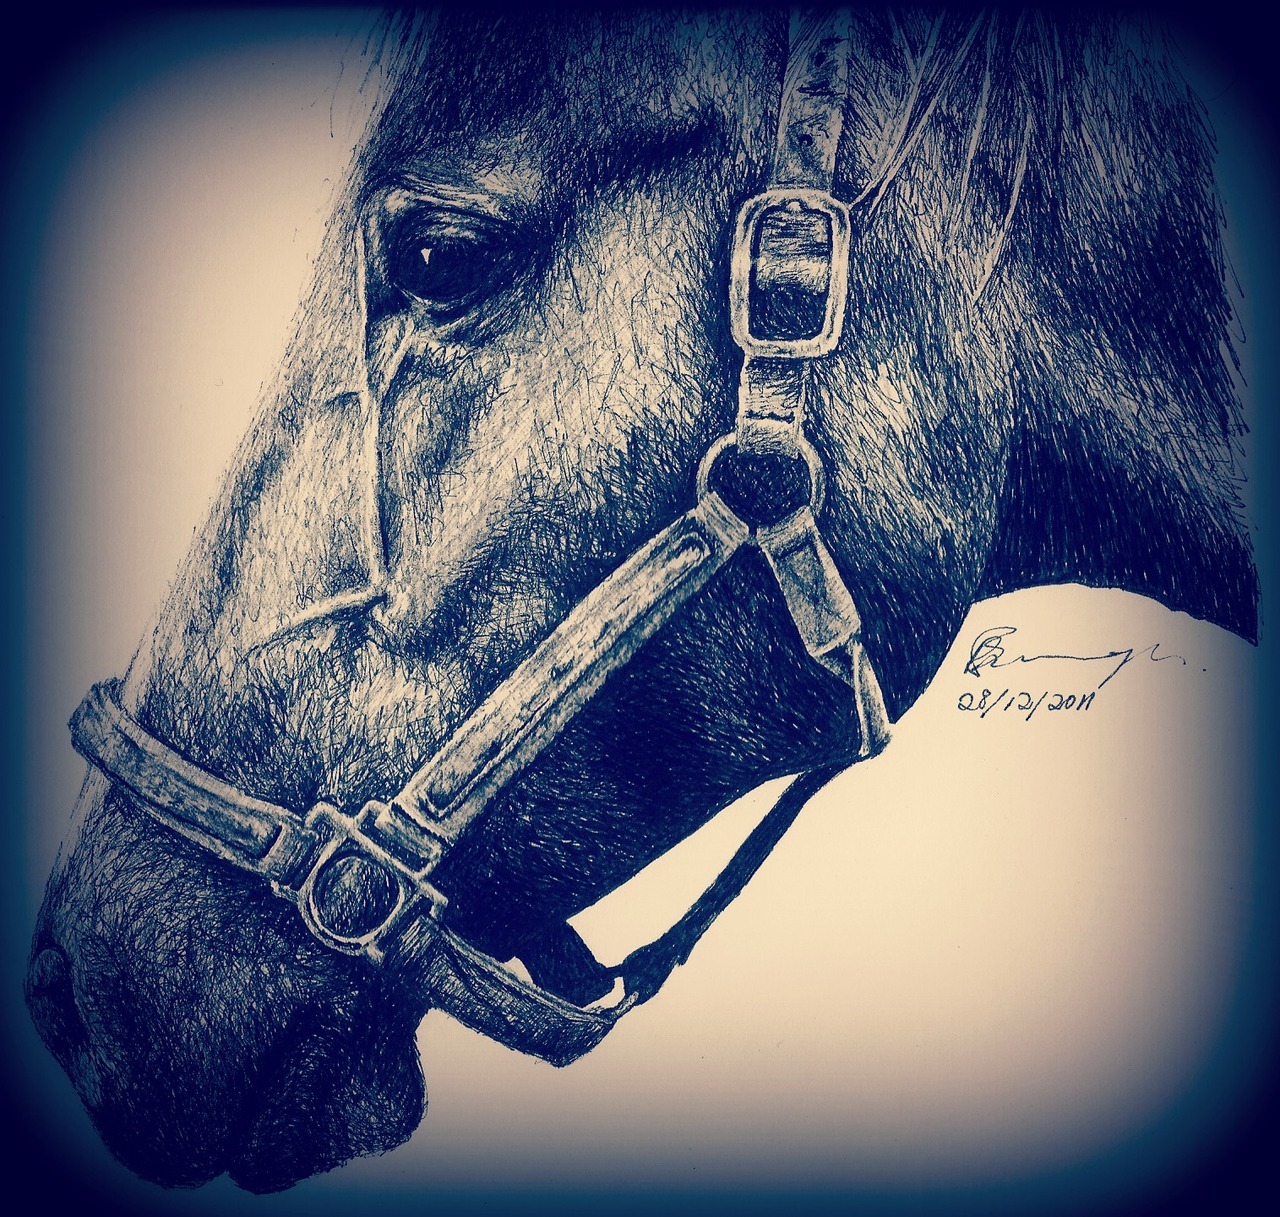 My horse drawing. Done in pen, it took about 5hrs. (: See more of my drawings here - http://www.tumblr.com/blog/roxbur (: